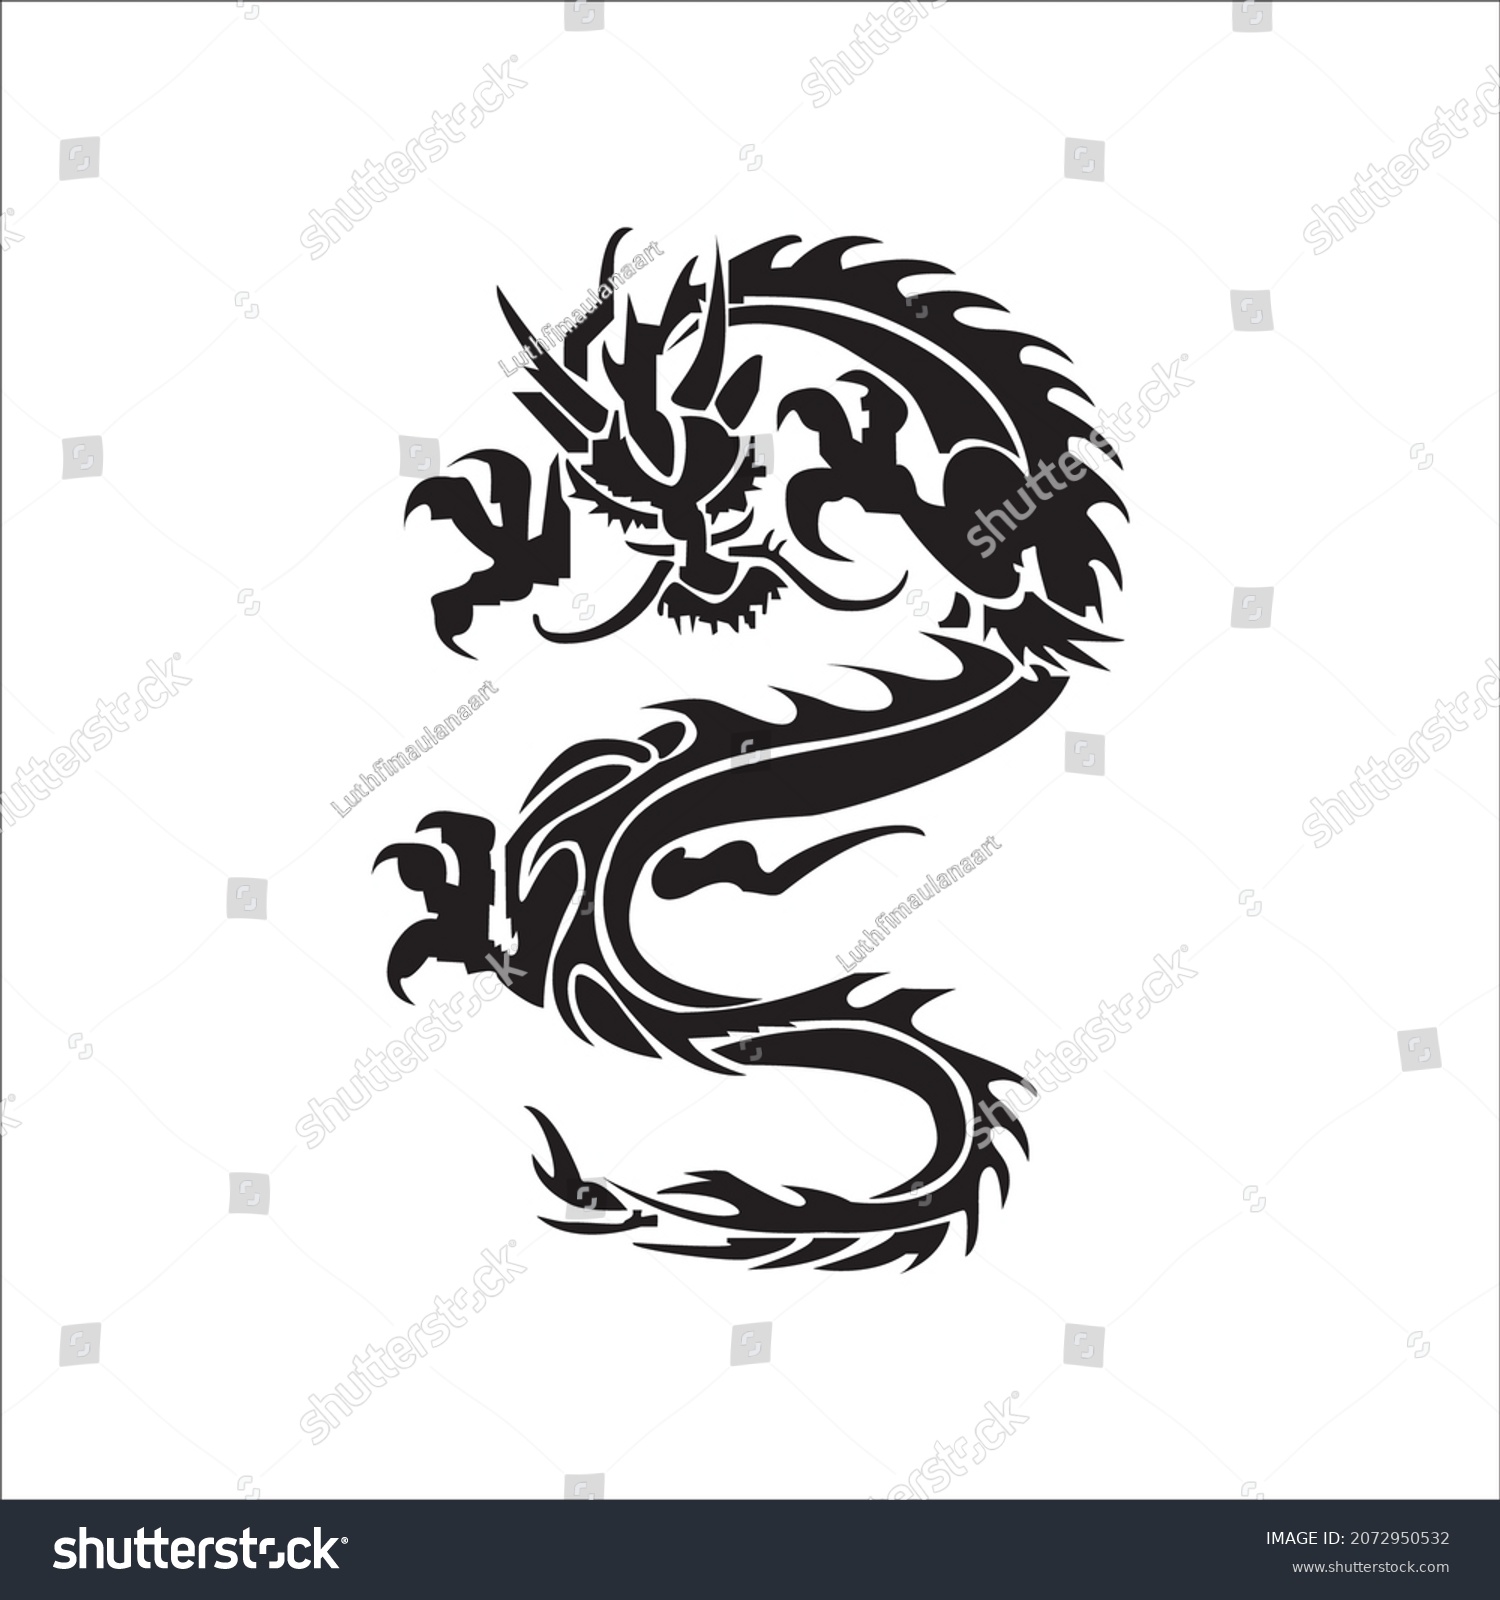 Collection Cool Dragon Logo Vector Images Stock Vector (Royalty Free ...